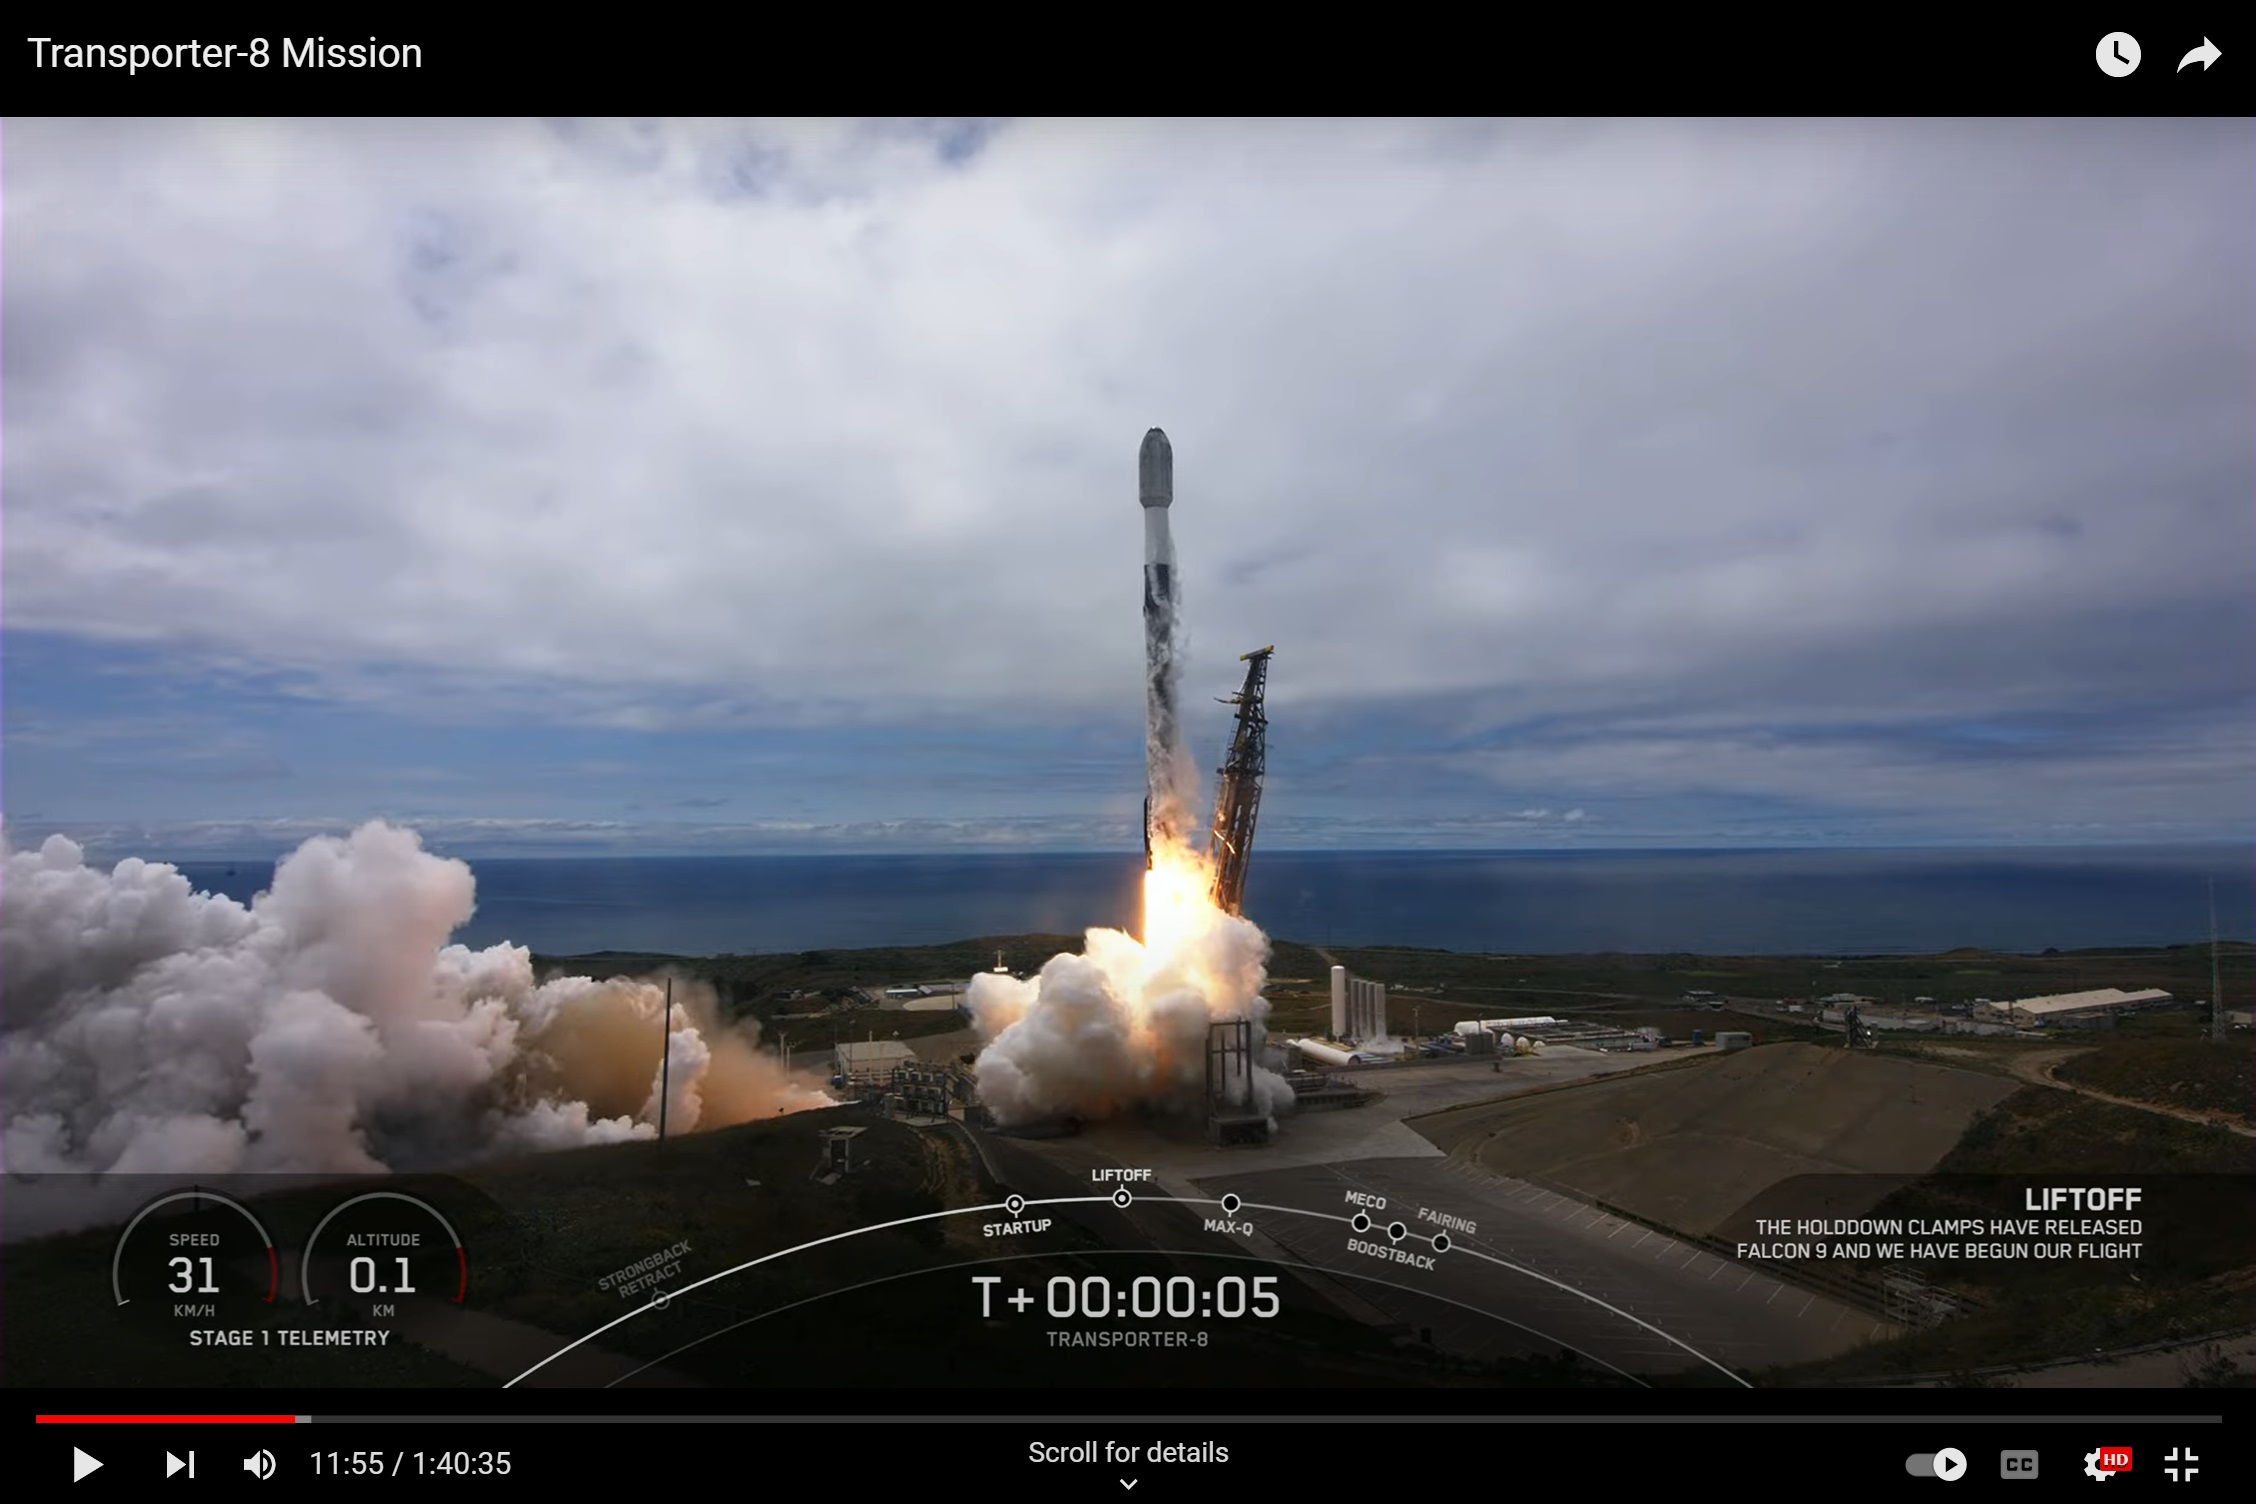 Launch of Neumann Drive on SpaceX Falcon 9 rocket (Transporter 8)